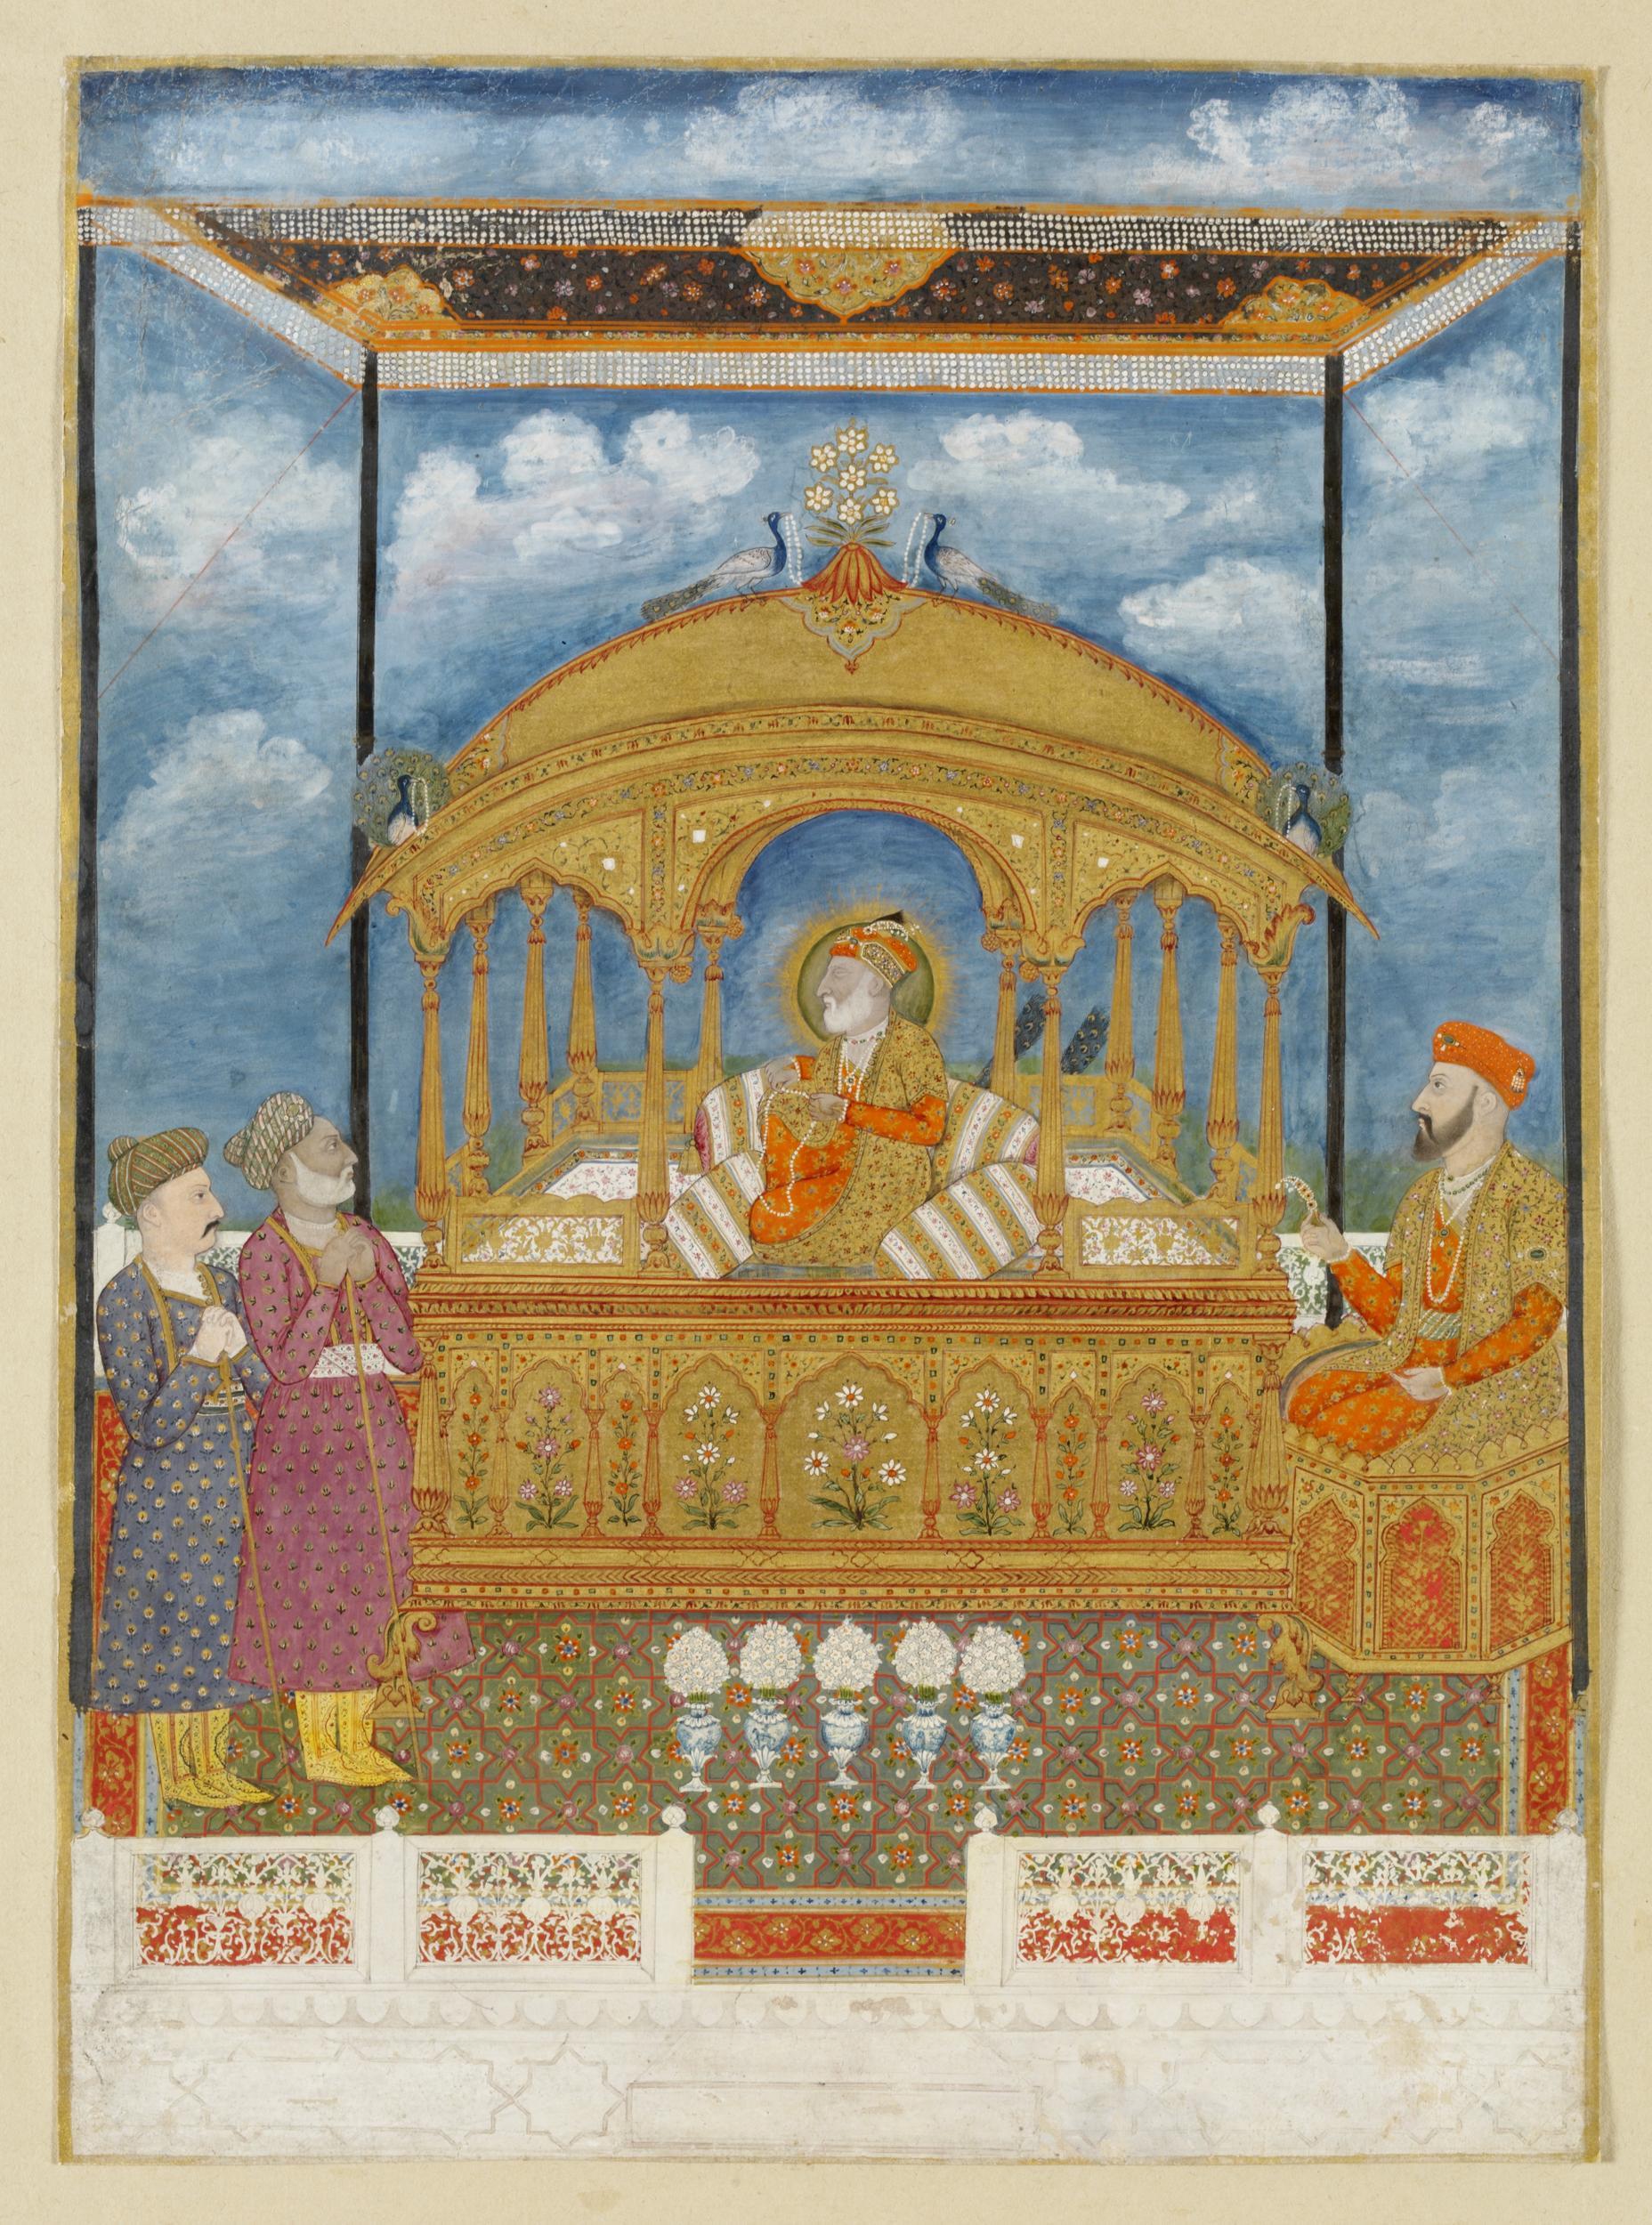 The blind Mughal emperor Shah Alam II is shown seated on a golden throne, with his son and two attendants near him.